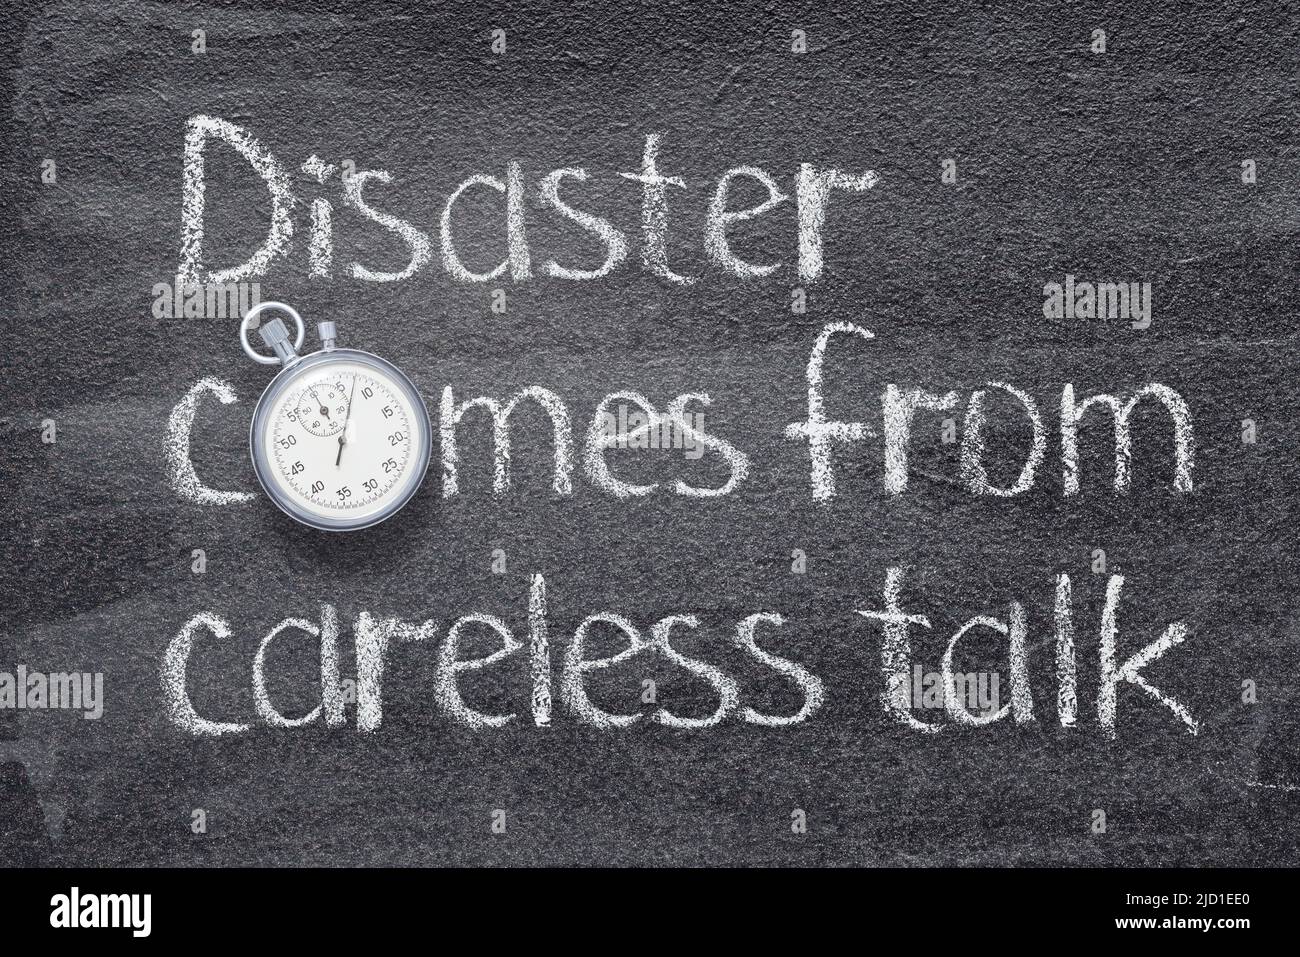 Disaster comes from careless talk Chinese proverb written on chalkboard with vintage precise stopwatch Stock Photo